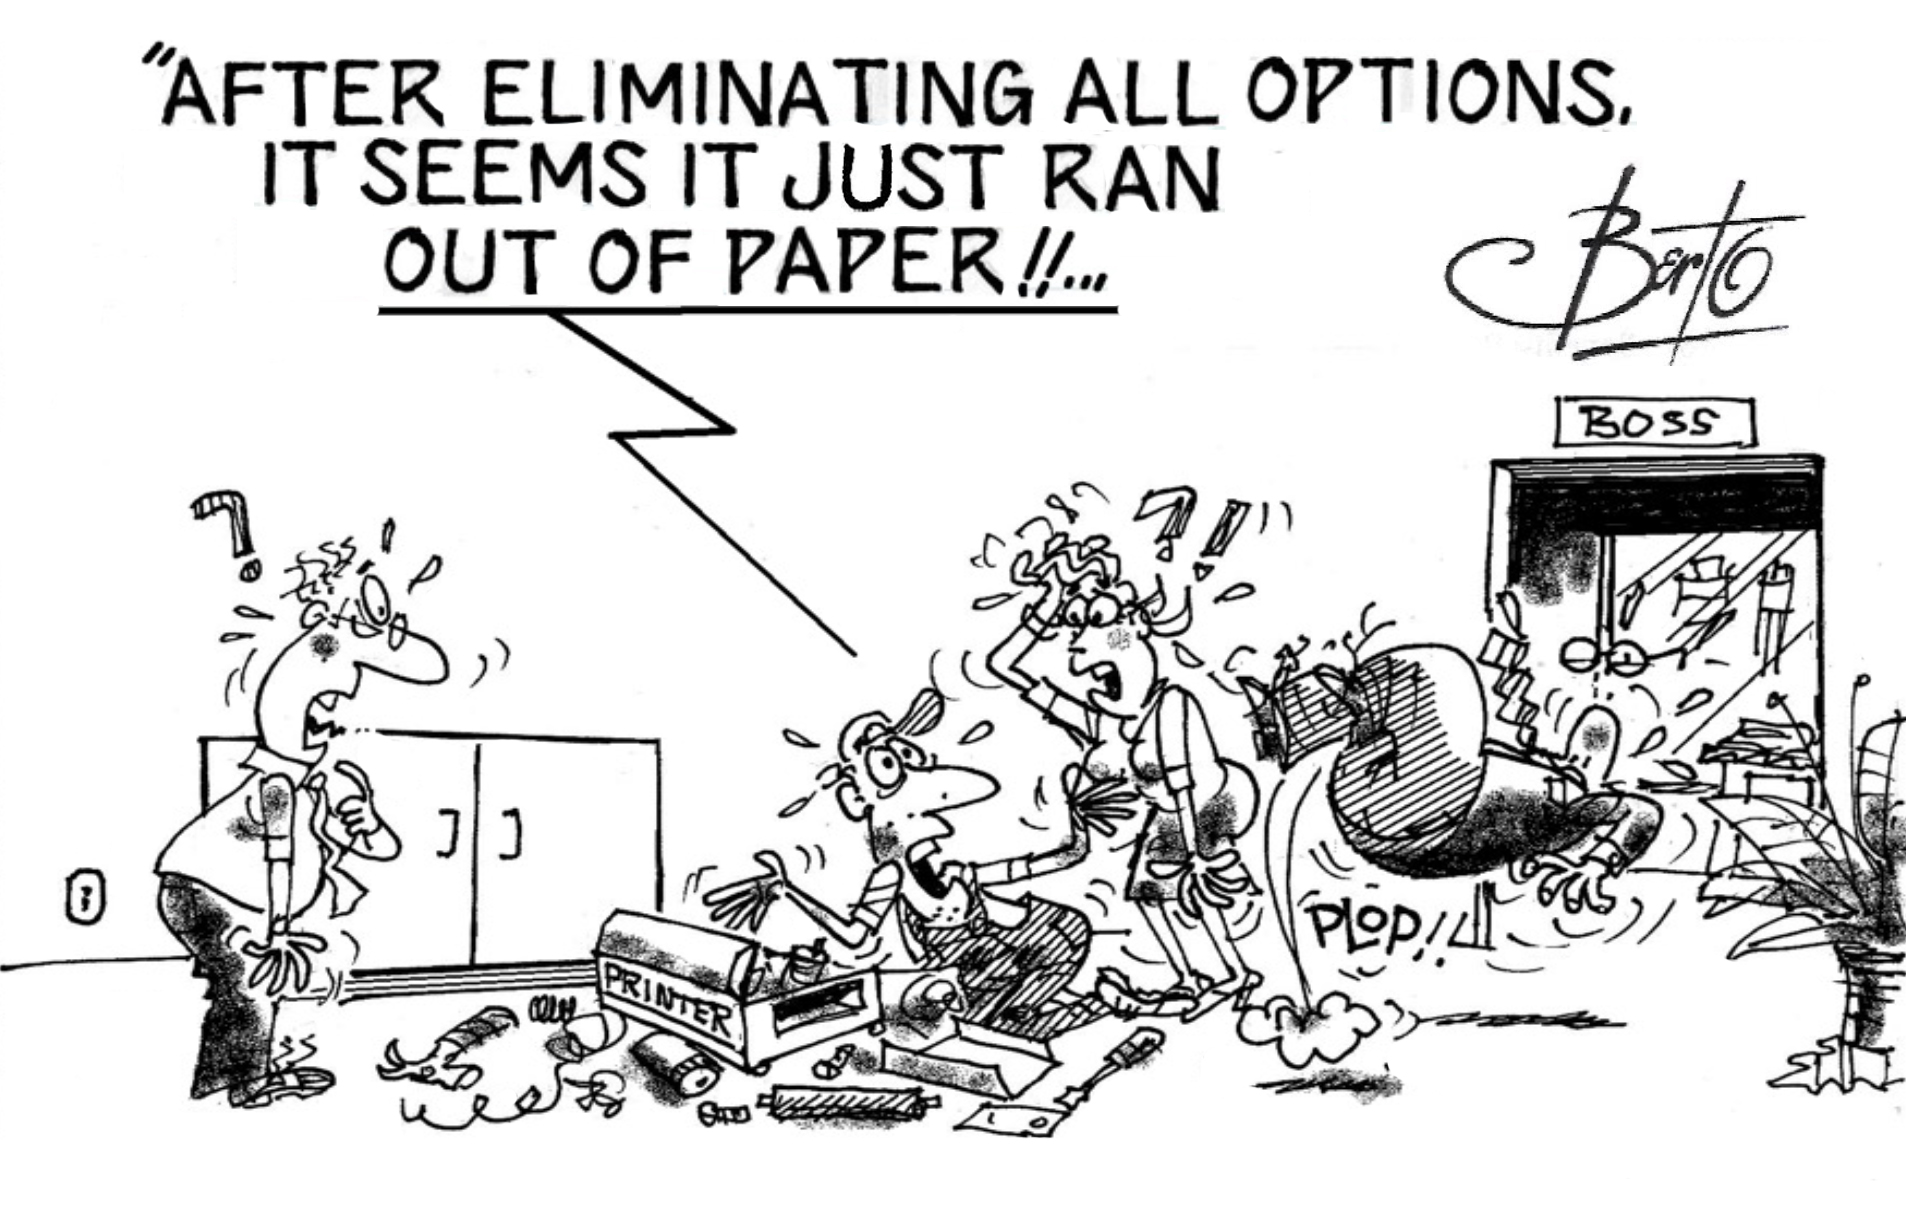 Berto Sighs: Despite Everything It Just Ran Out of Paper